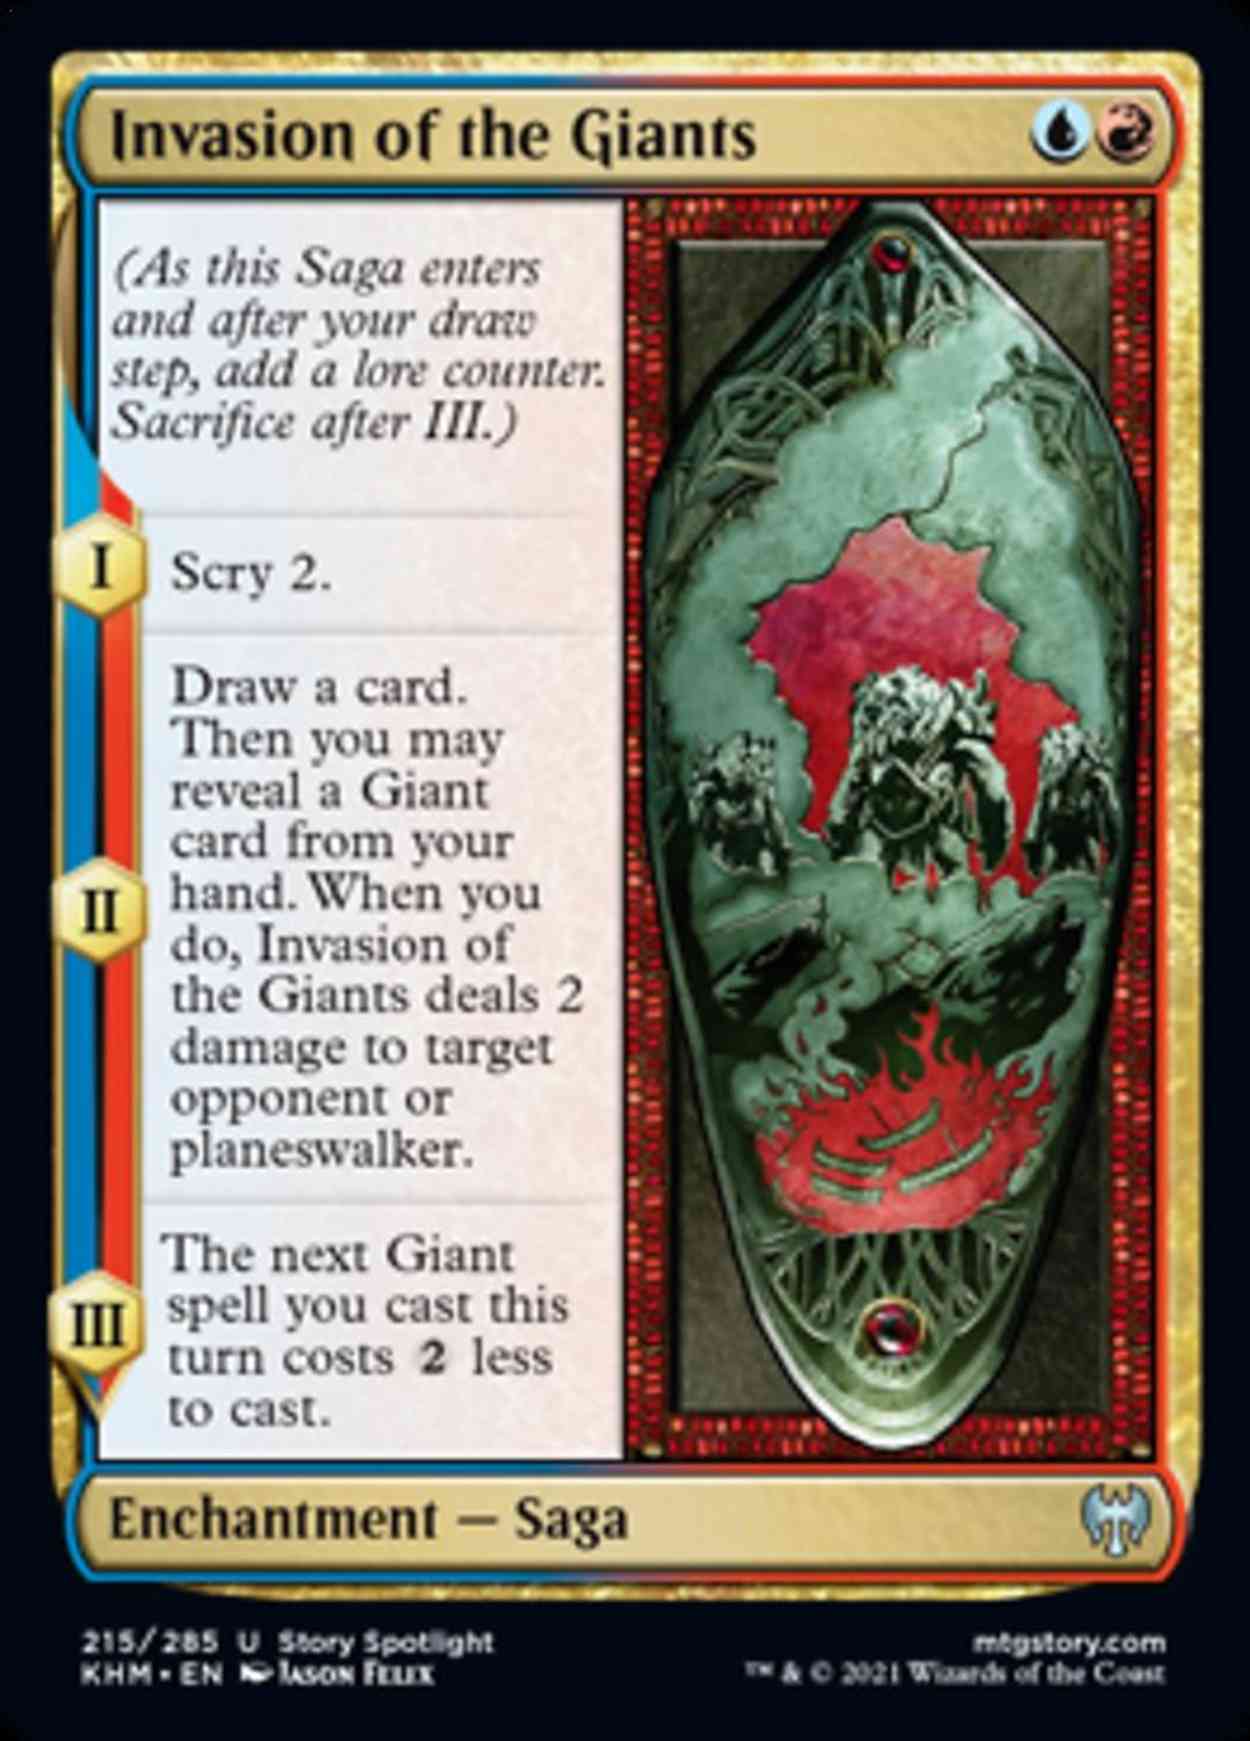 Invasion of the Giants magic card front